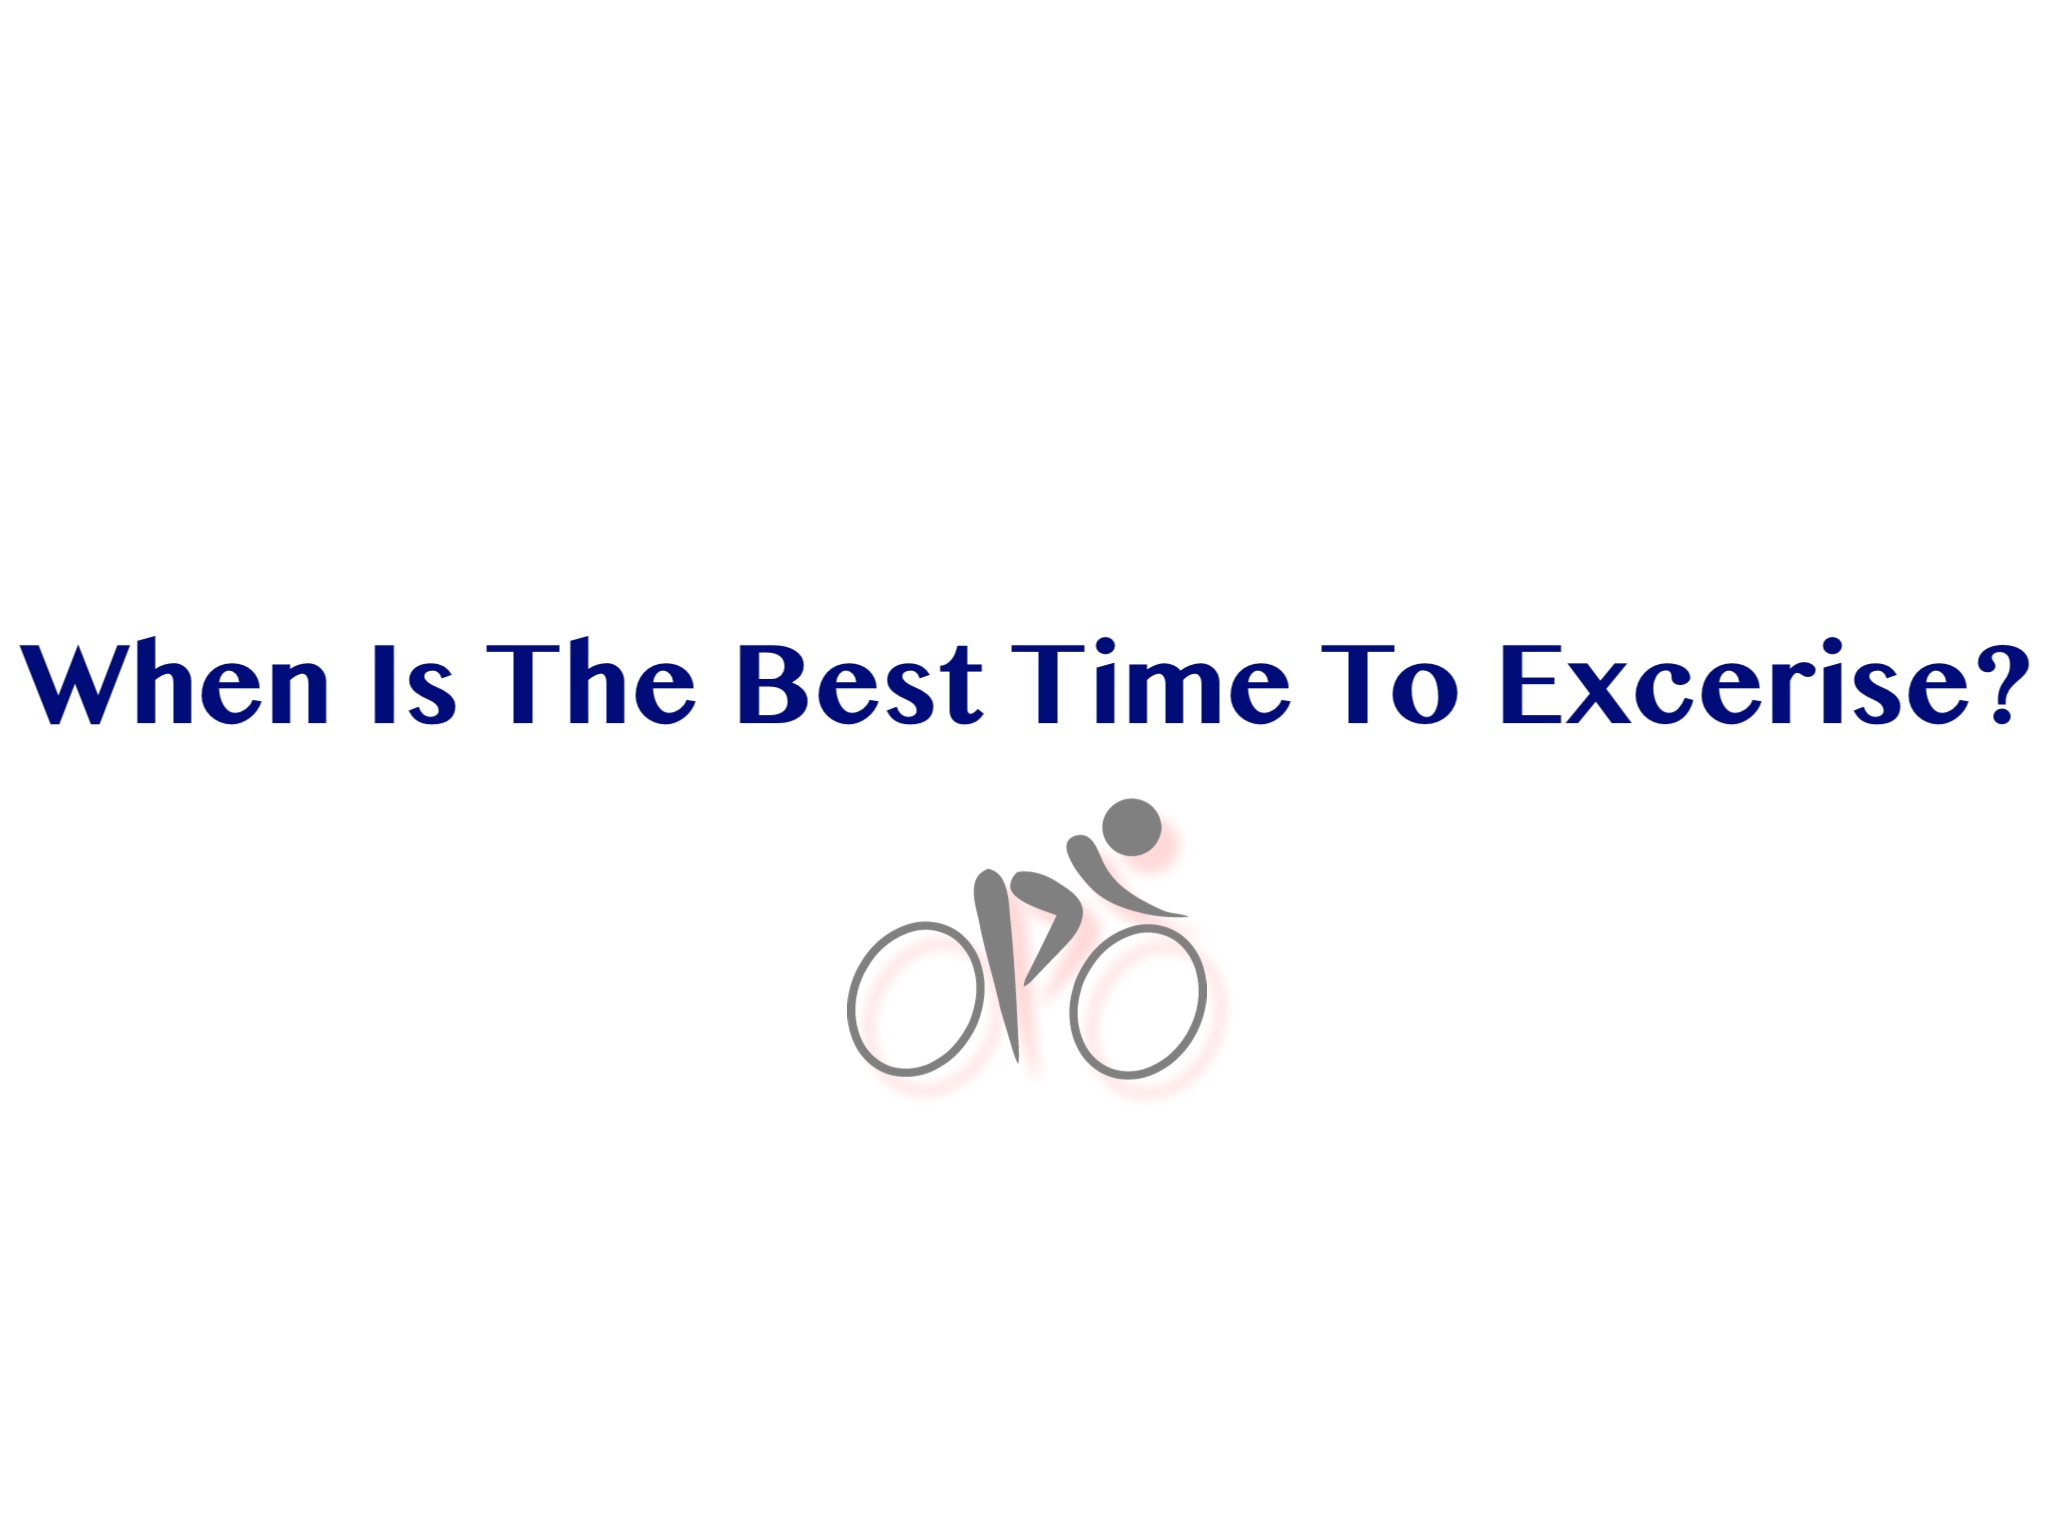 When is the best time to exercise?